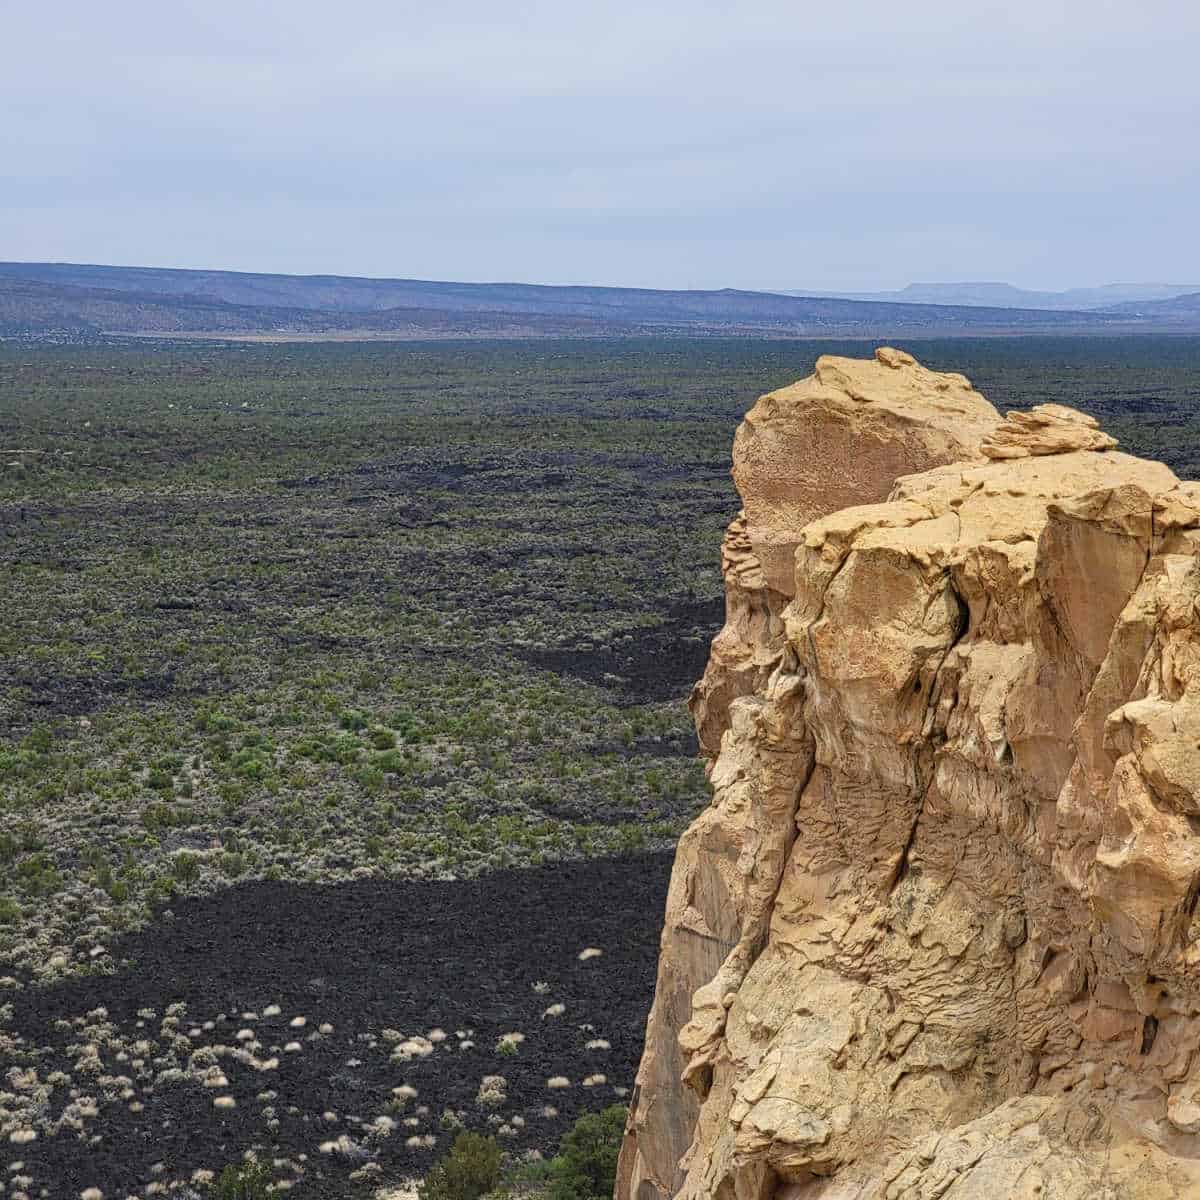 View of the lava field from the Sandstone Bluffs Overlook at El Malpais National Monument